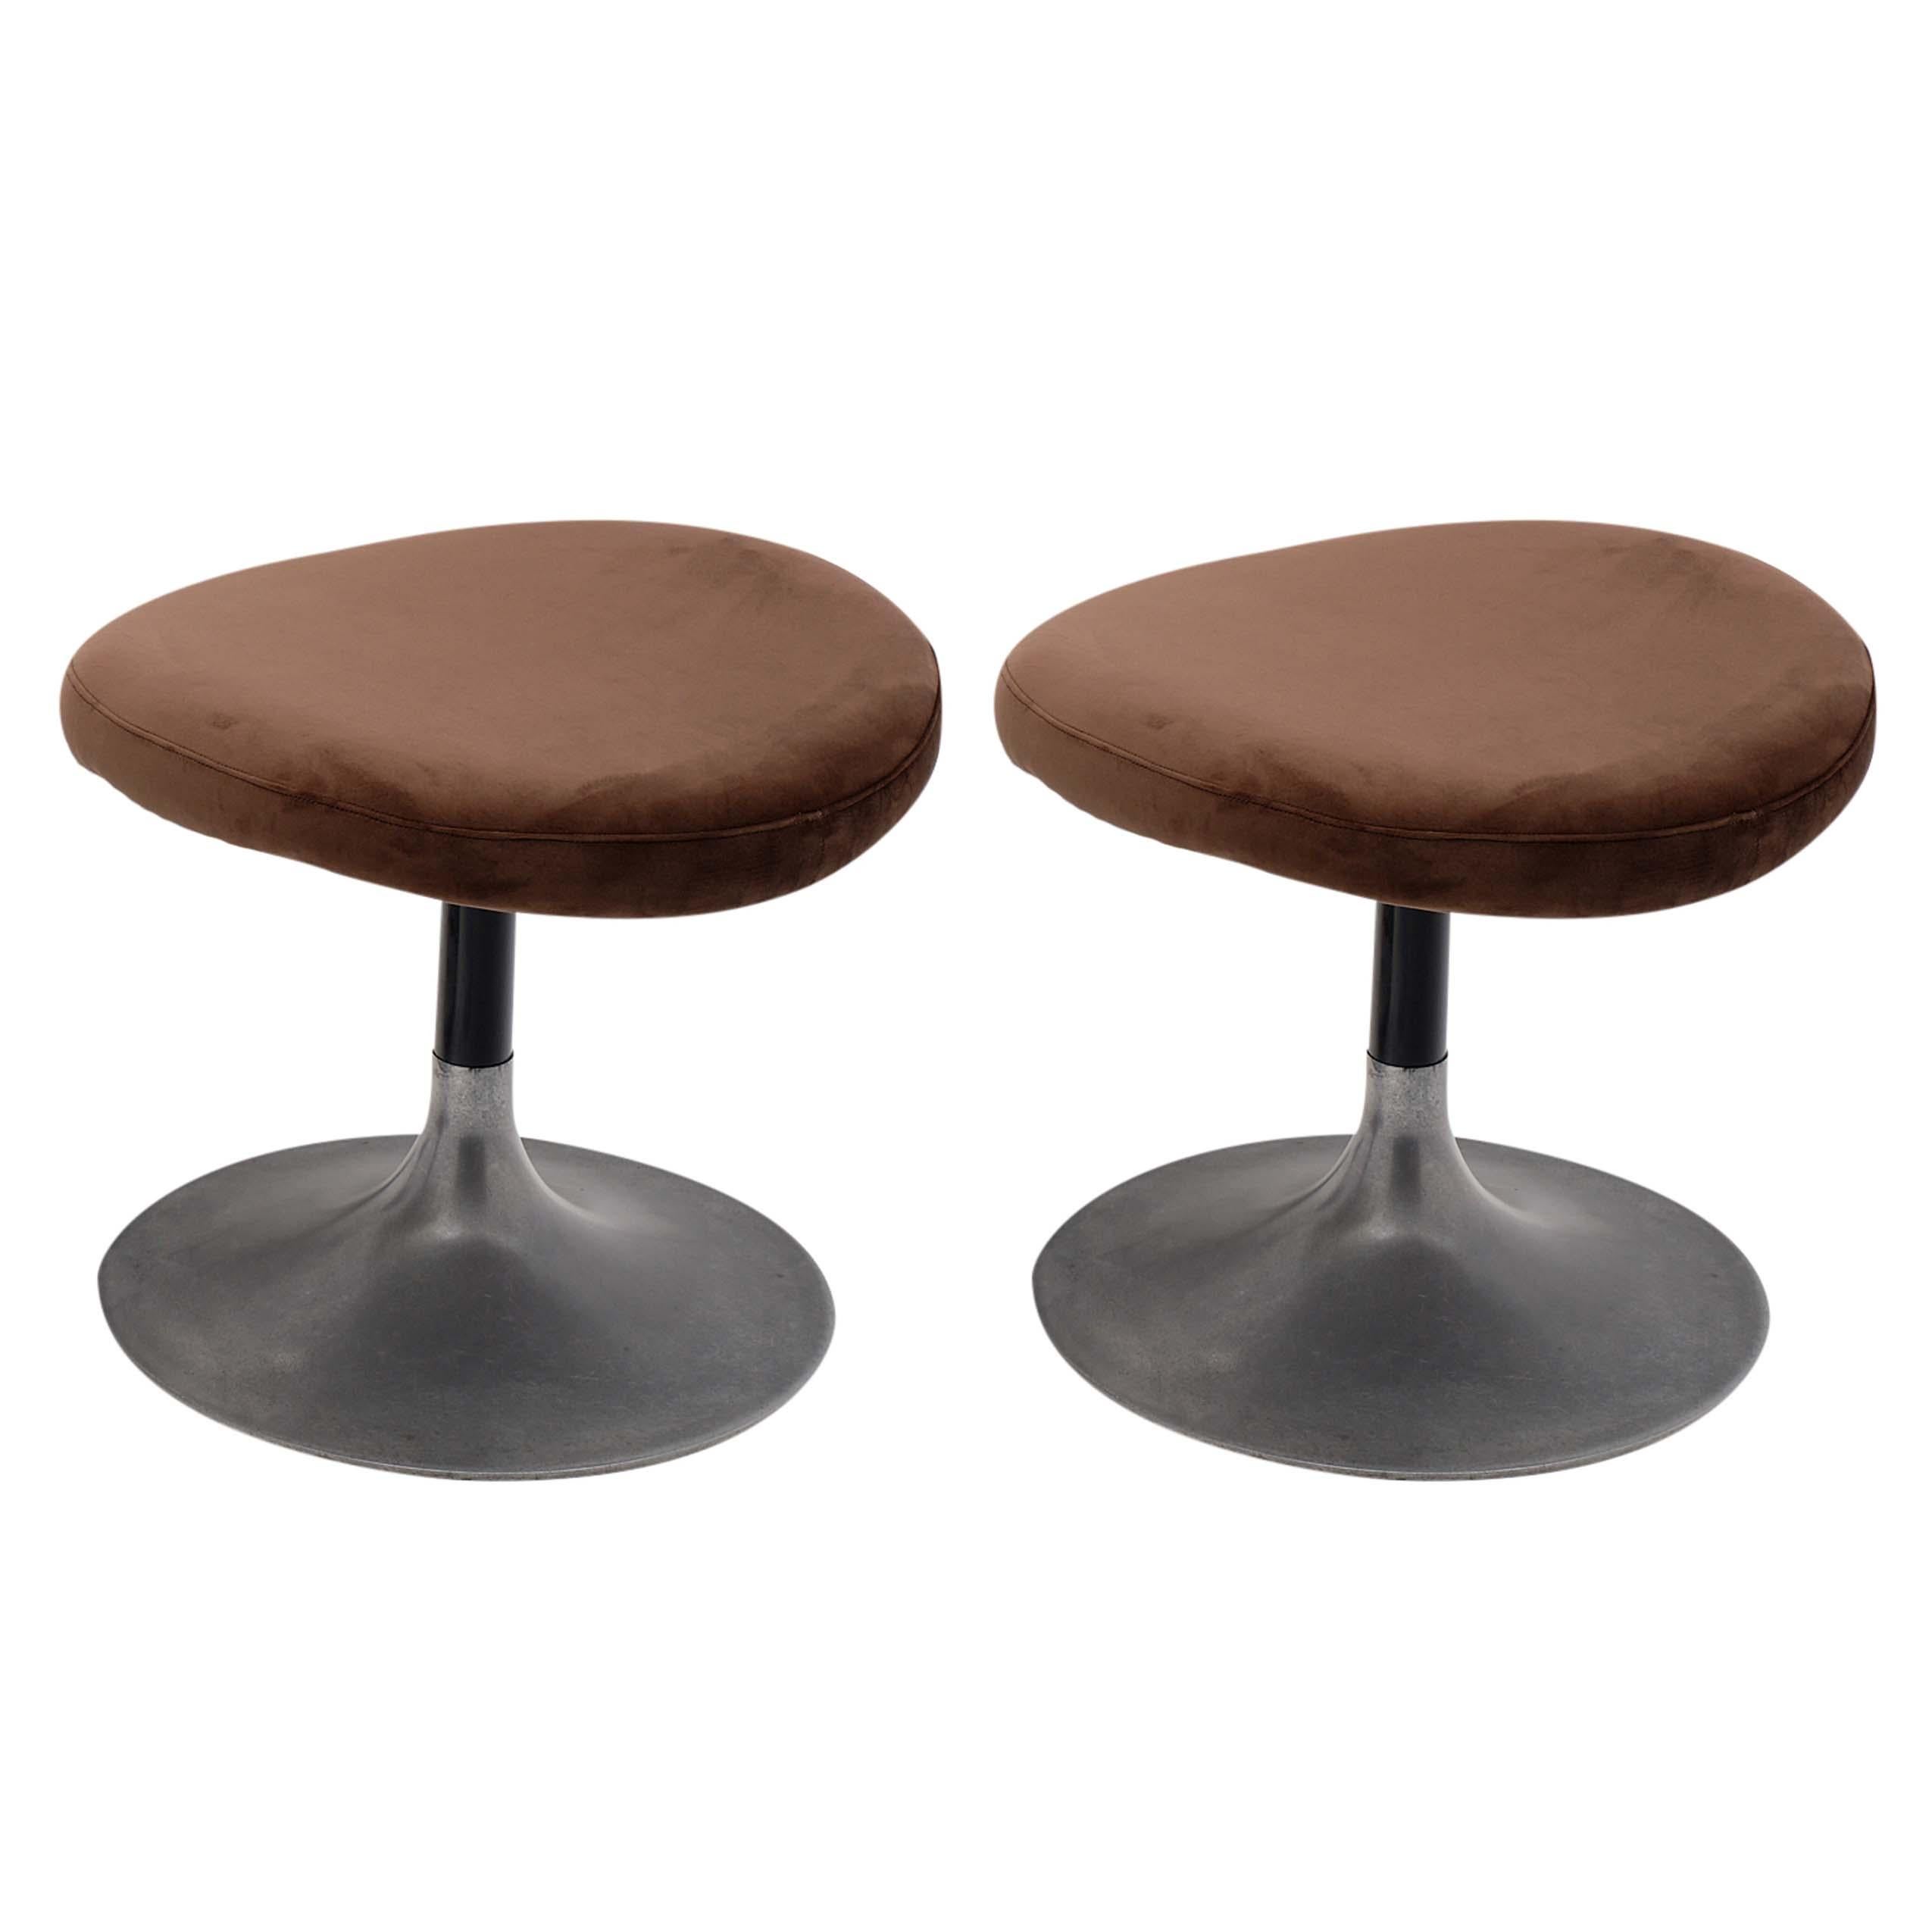 Late 20th Century Italian Modernist Stools For Sale